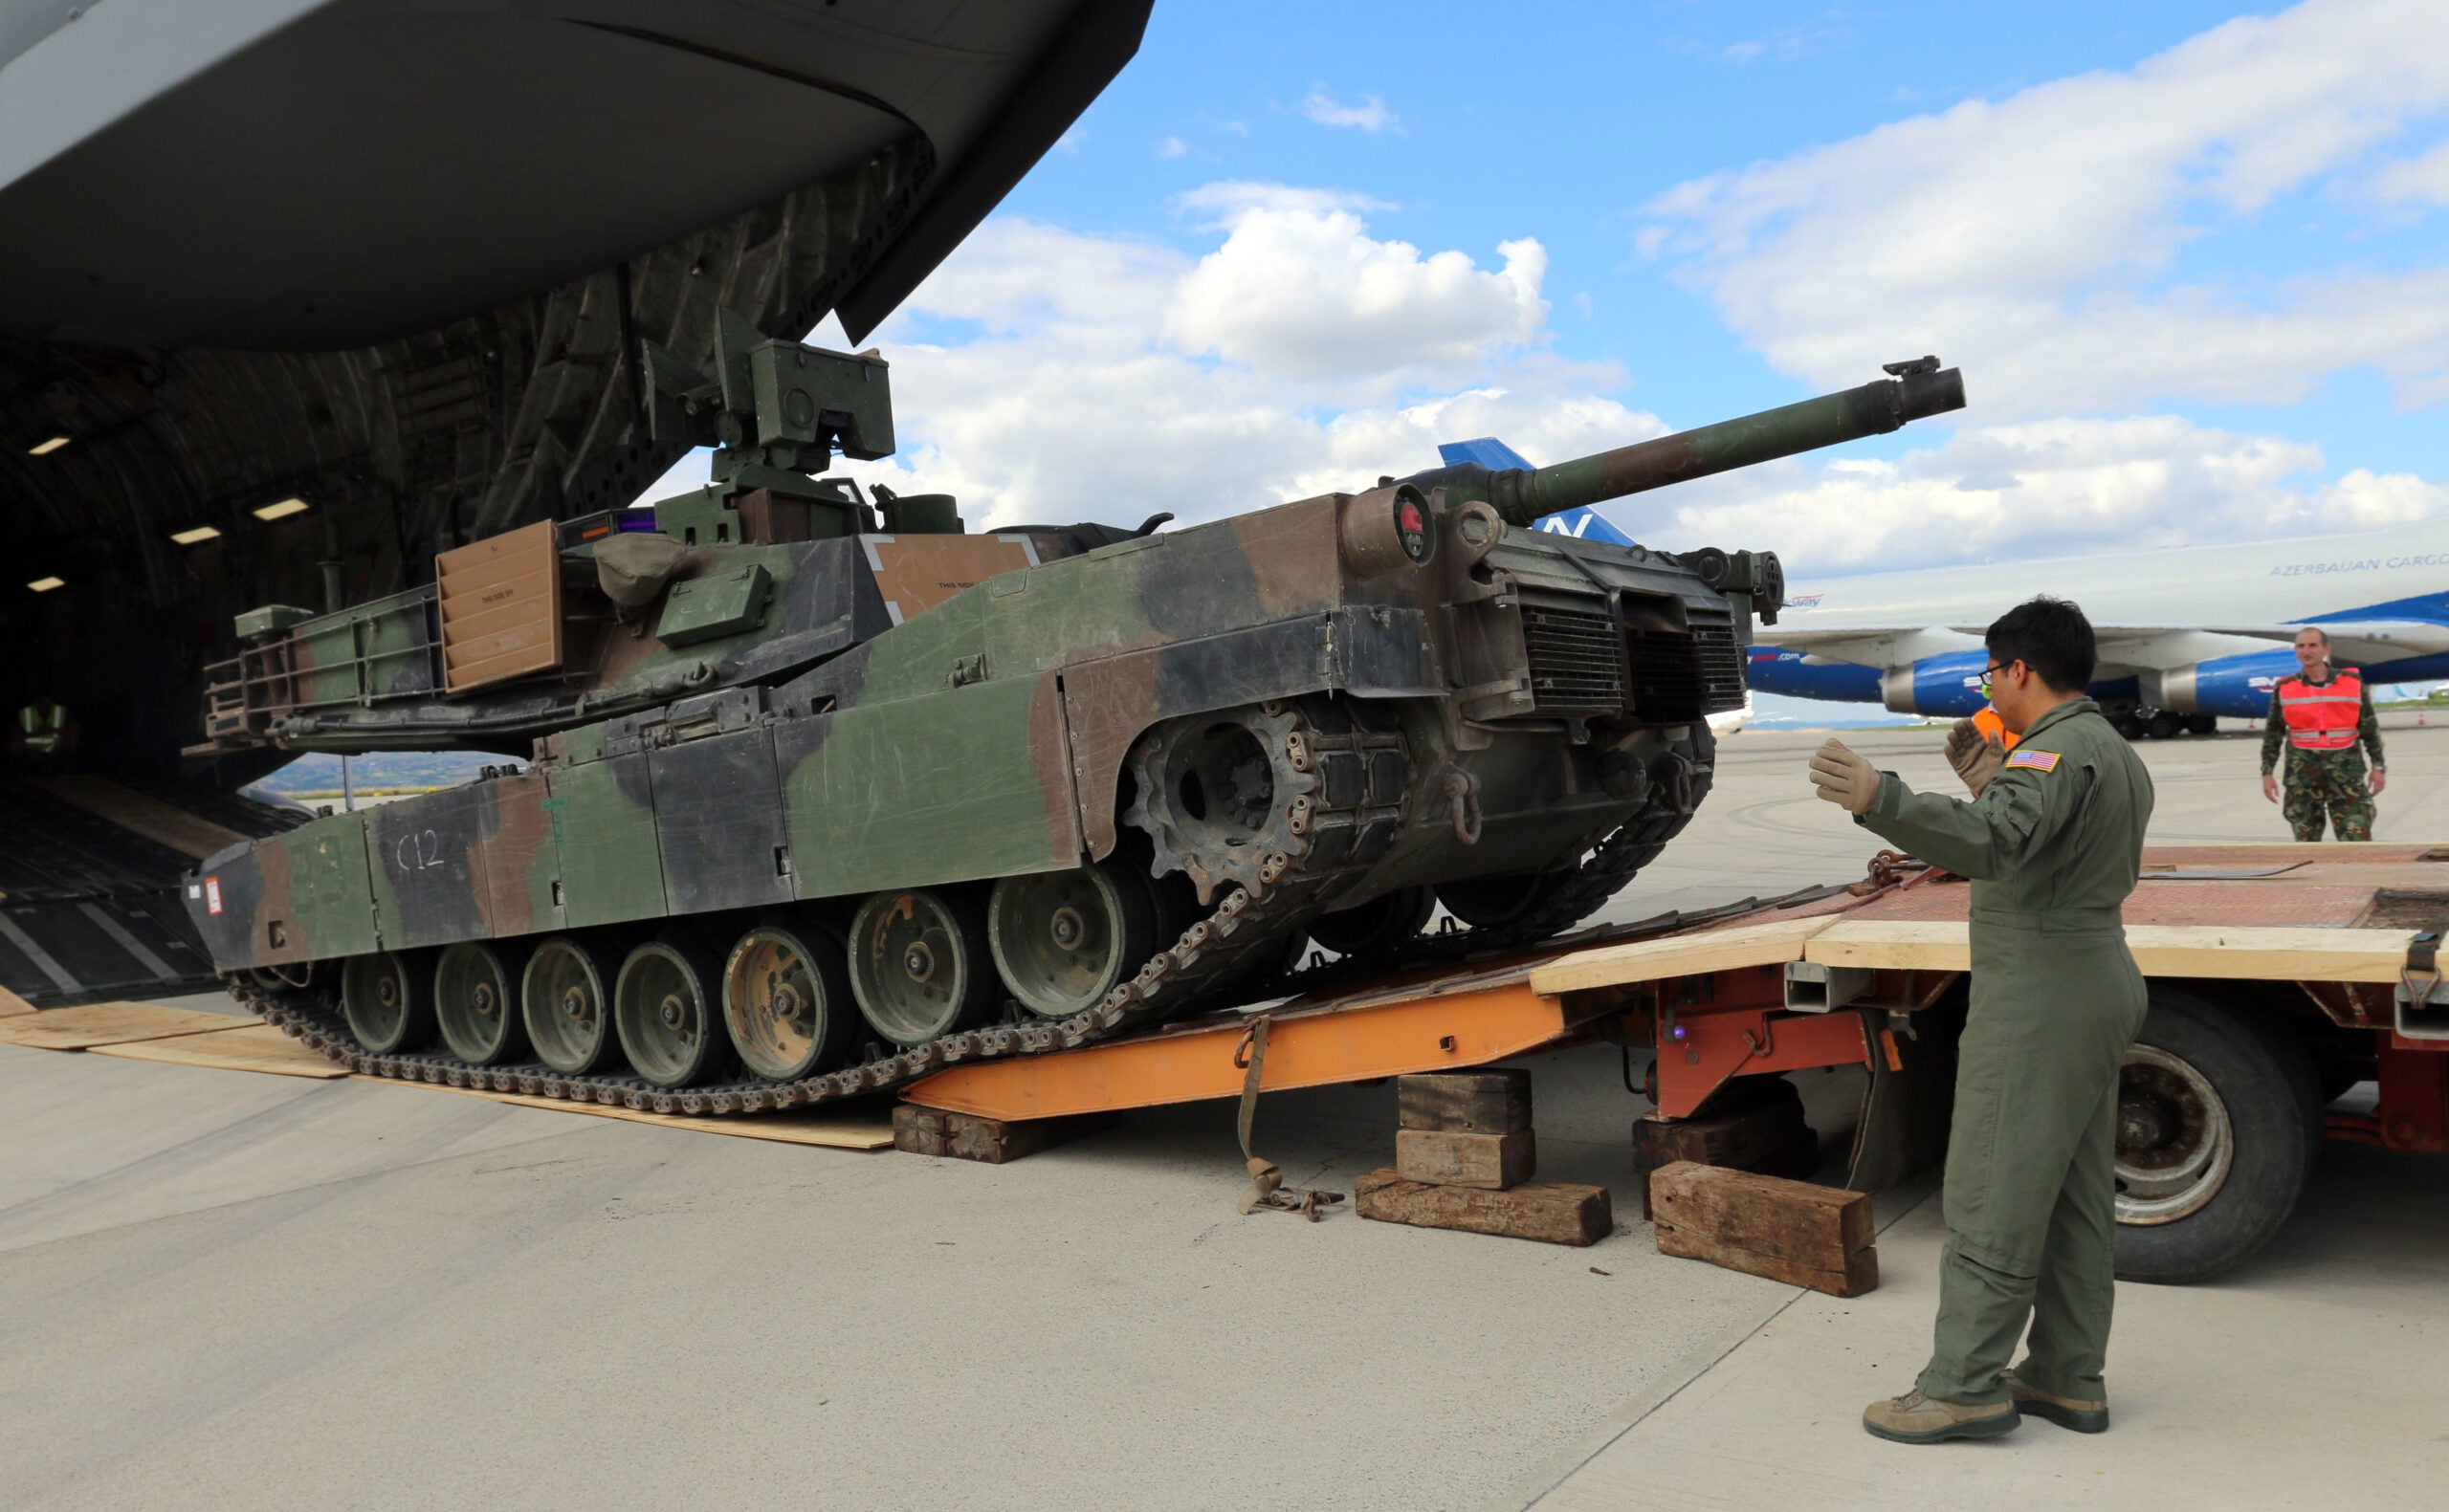 Airman 1st Class Eric E. Anaya, C-17 Loadmaster, 4th Airlift Squadron, United States Air Force, and a native of Omaha, Neb., guides an M1A2 Abrams tank onto a truck for transport after it was unloaded from a C17, Burgas, Bulgaria, June 22. Transported as part of a tank section from Germany to Bulgaria, the Abrams tank will be used by soldiers from 3rd Battalion, 69th Armor Regiment, and 2nd Squadron, 2nd Cavalry Regiment, alongside Bulgarian soldiers from the 6th Brigade Battle Group, during a tank live fire exercise during Operation Speed and Power. Operation Speed and Power is a joint training exercise which will demonstrate U.S. Army Europe's preparedness to deliver strategic effect in Atlantic Resolve-South by showcasing the freedom of movement to maneuver and fire M1A2 Abrams anywhere along the Eastern Flank. This ability enables the NATO allies to defend themselves against all threats, and shows that the alliance remains ready to defend itself anywhere at any time. (U.S. Army photos by Spc. Jacqueline Dowland, 13th Public Affairs Detachment)